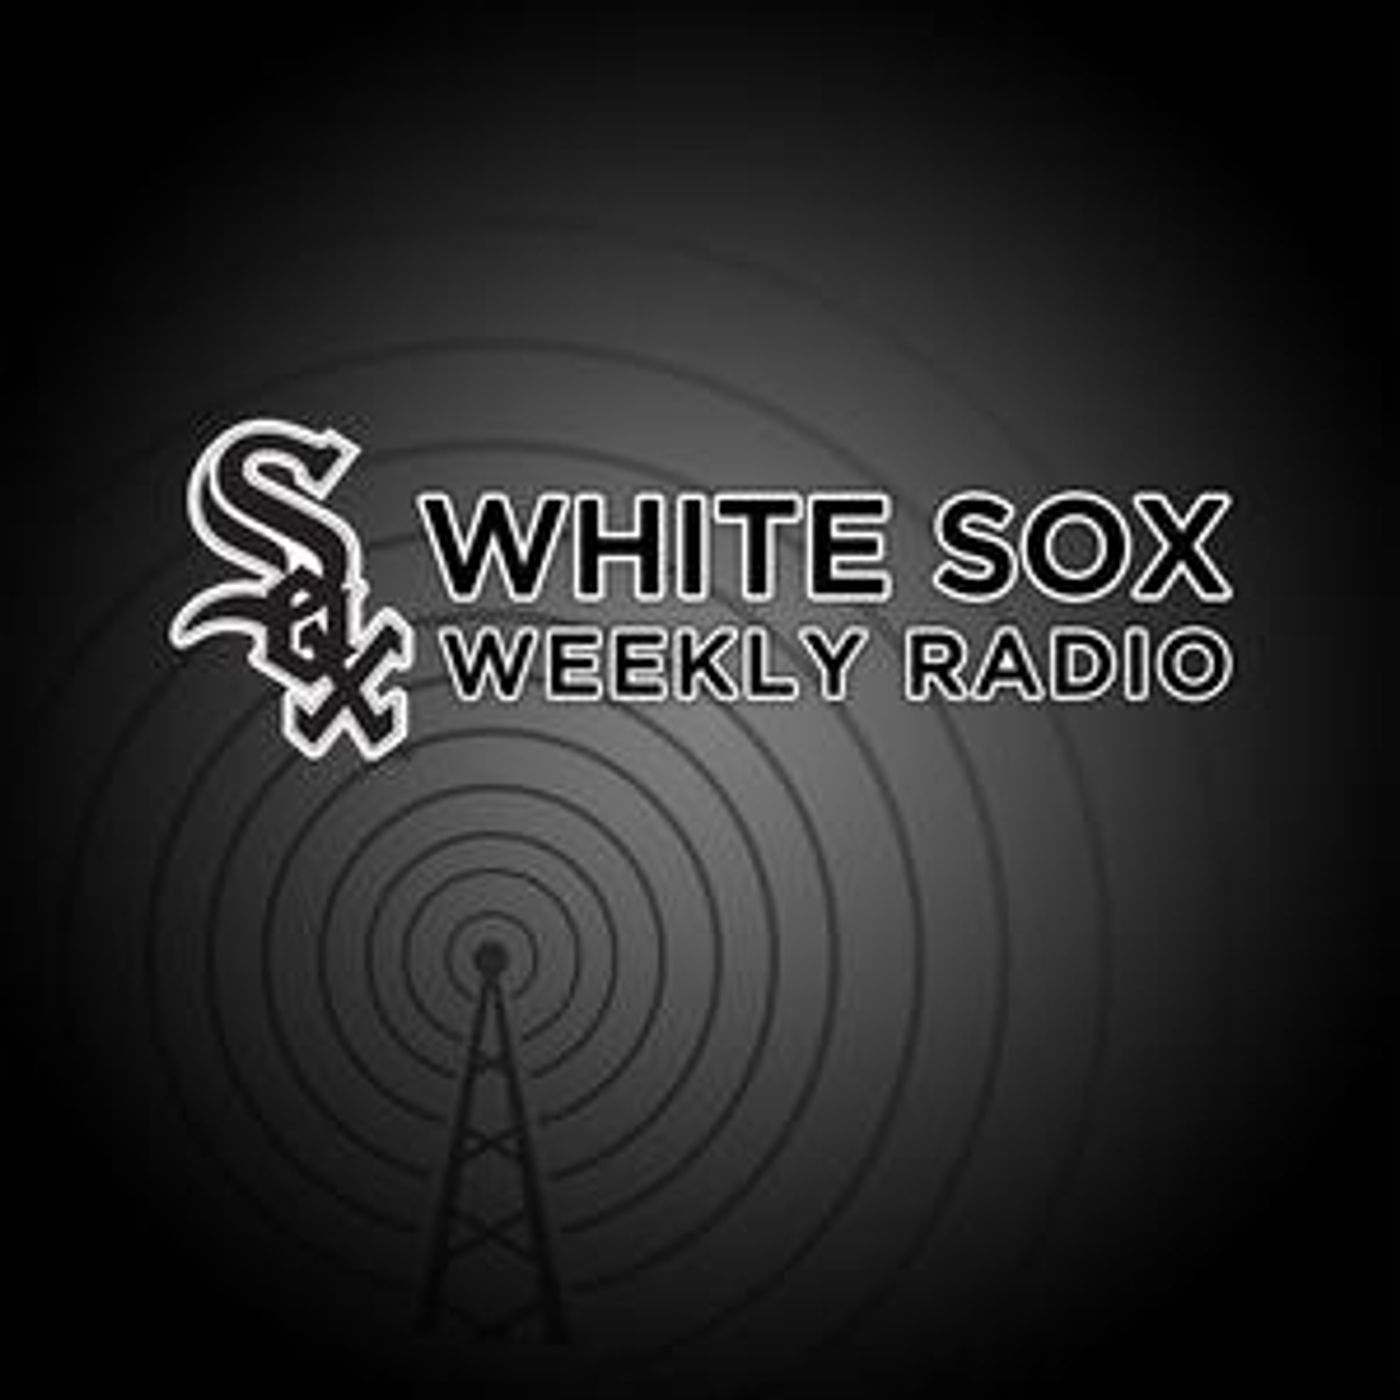 White Sox Weekly (06-10-17) Hour 2